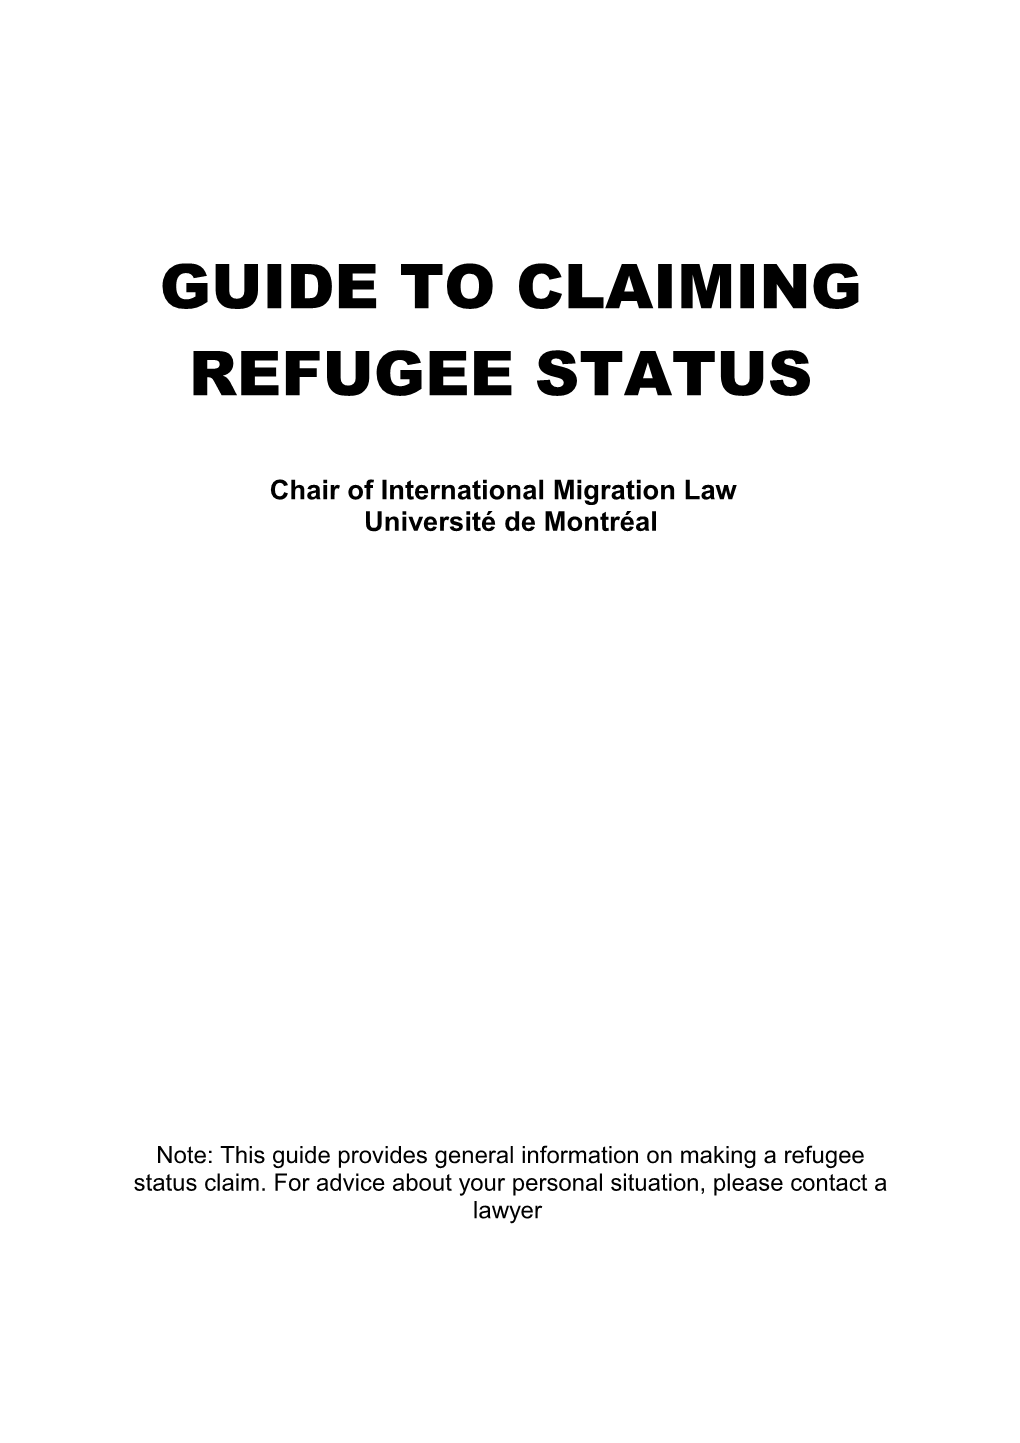 Guide to Claiming Refugee Status